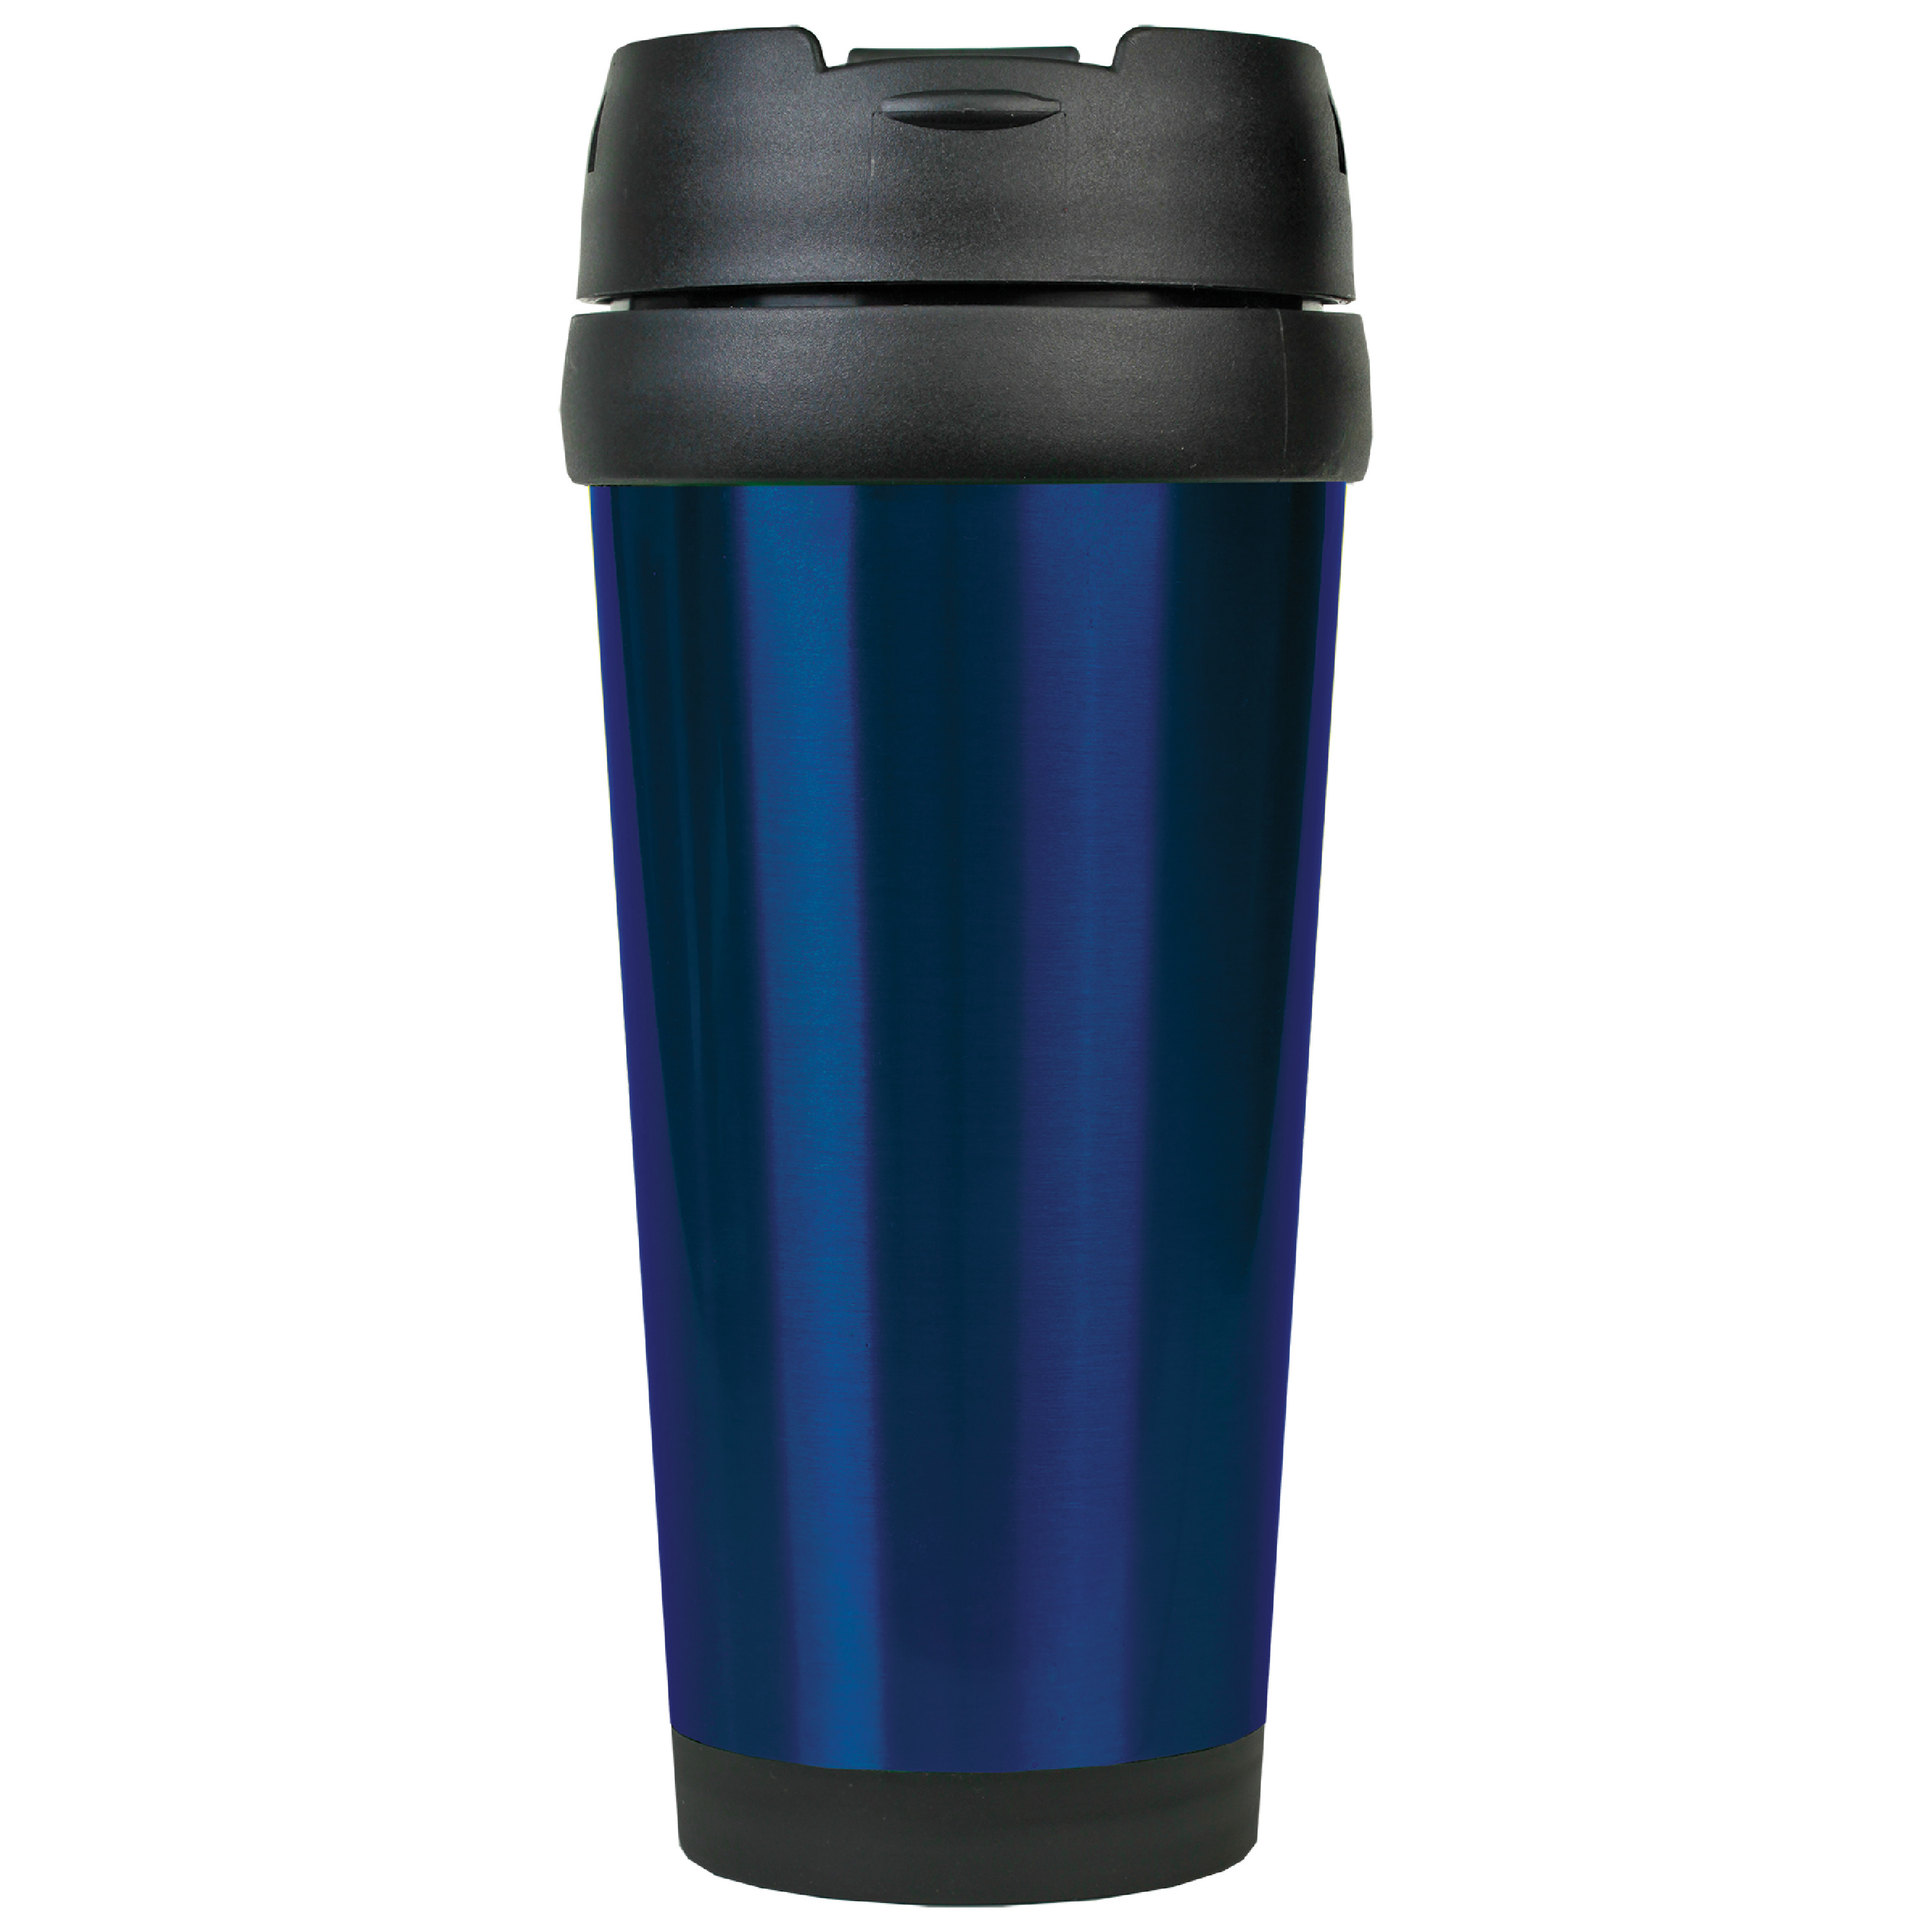 16 Ounce Stainless Steel Blue Travel Mug with Flip Top Lid